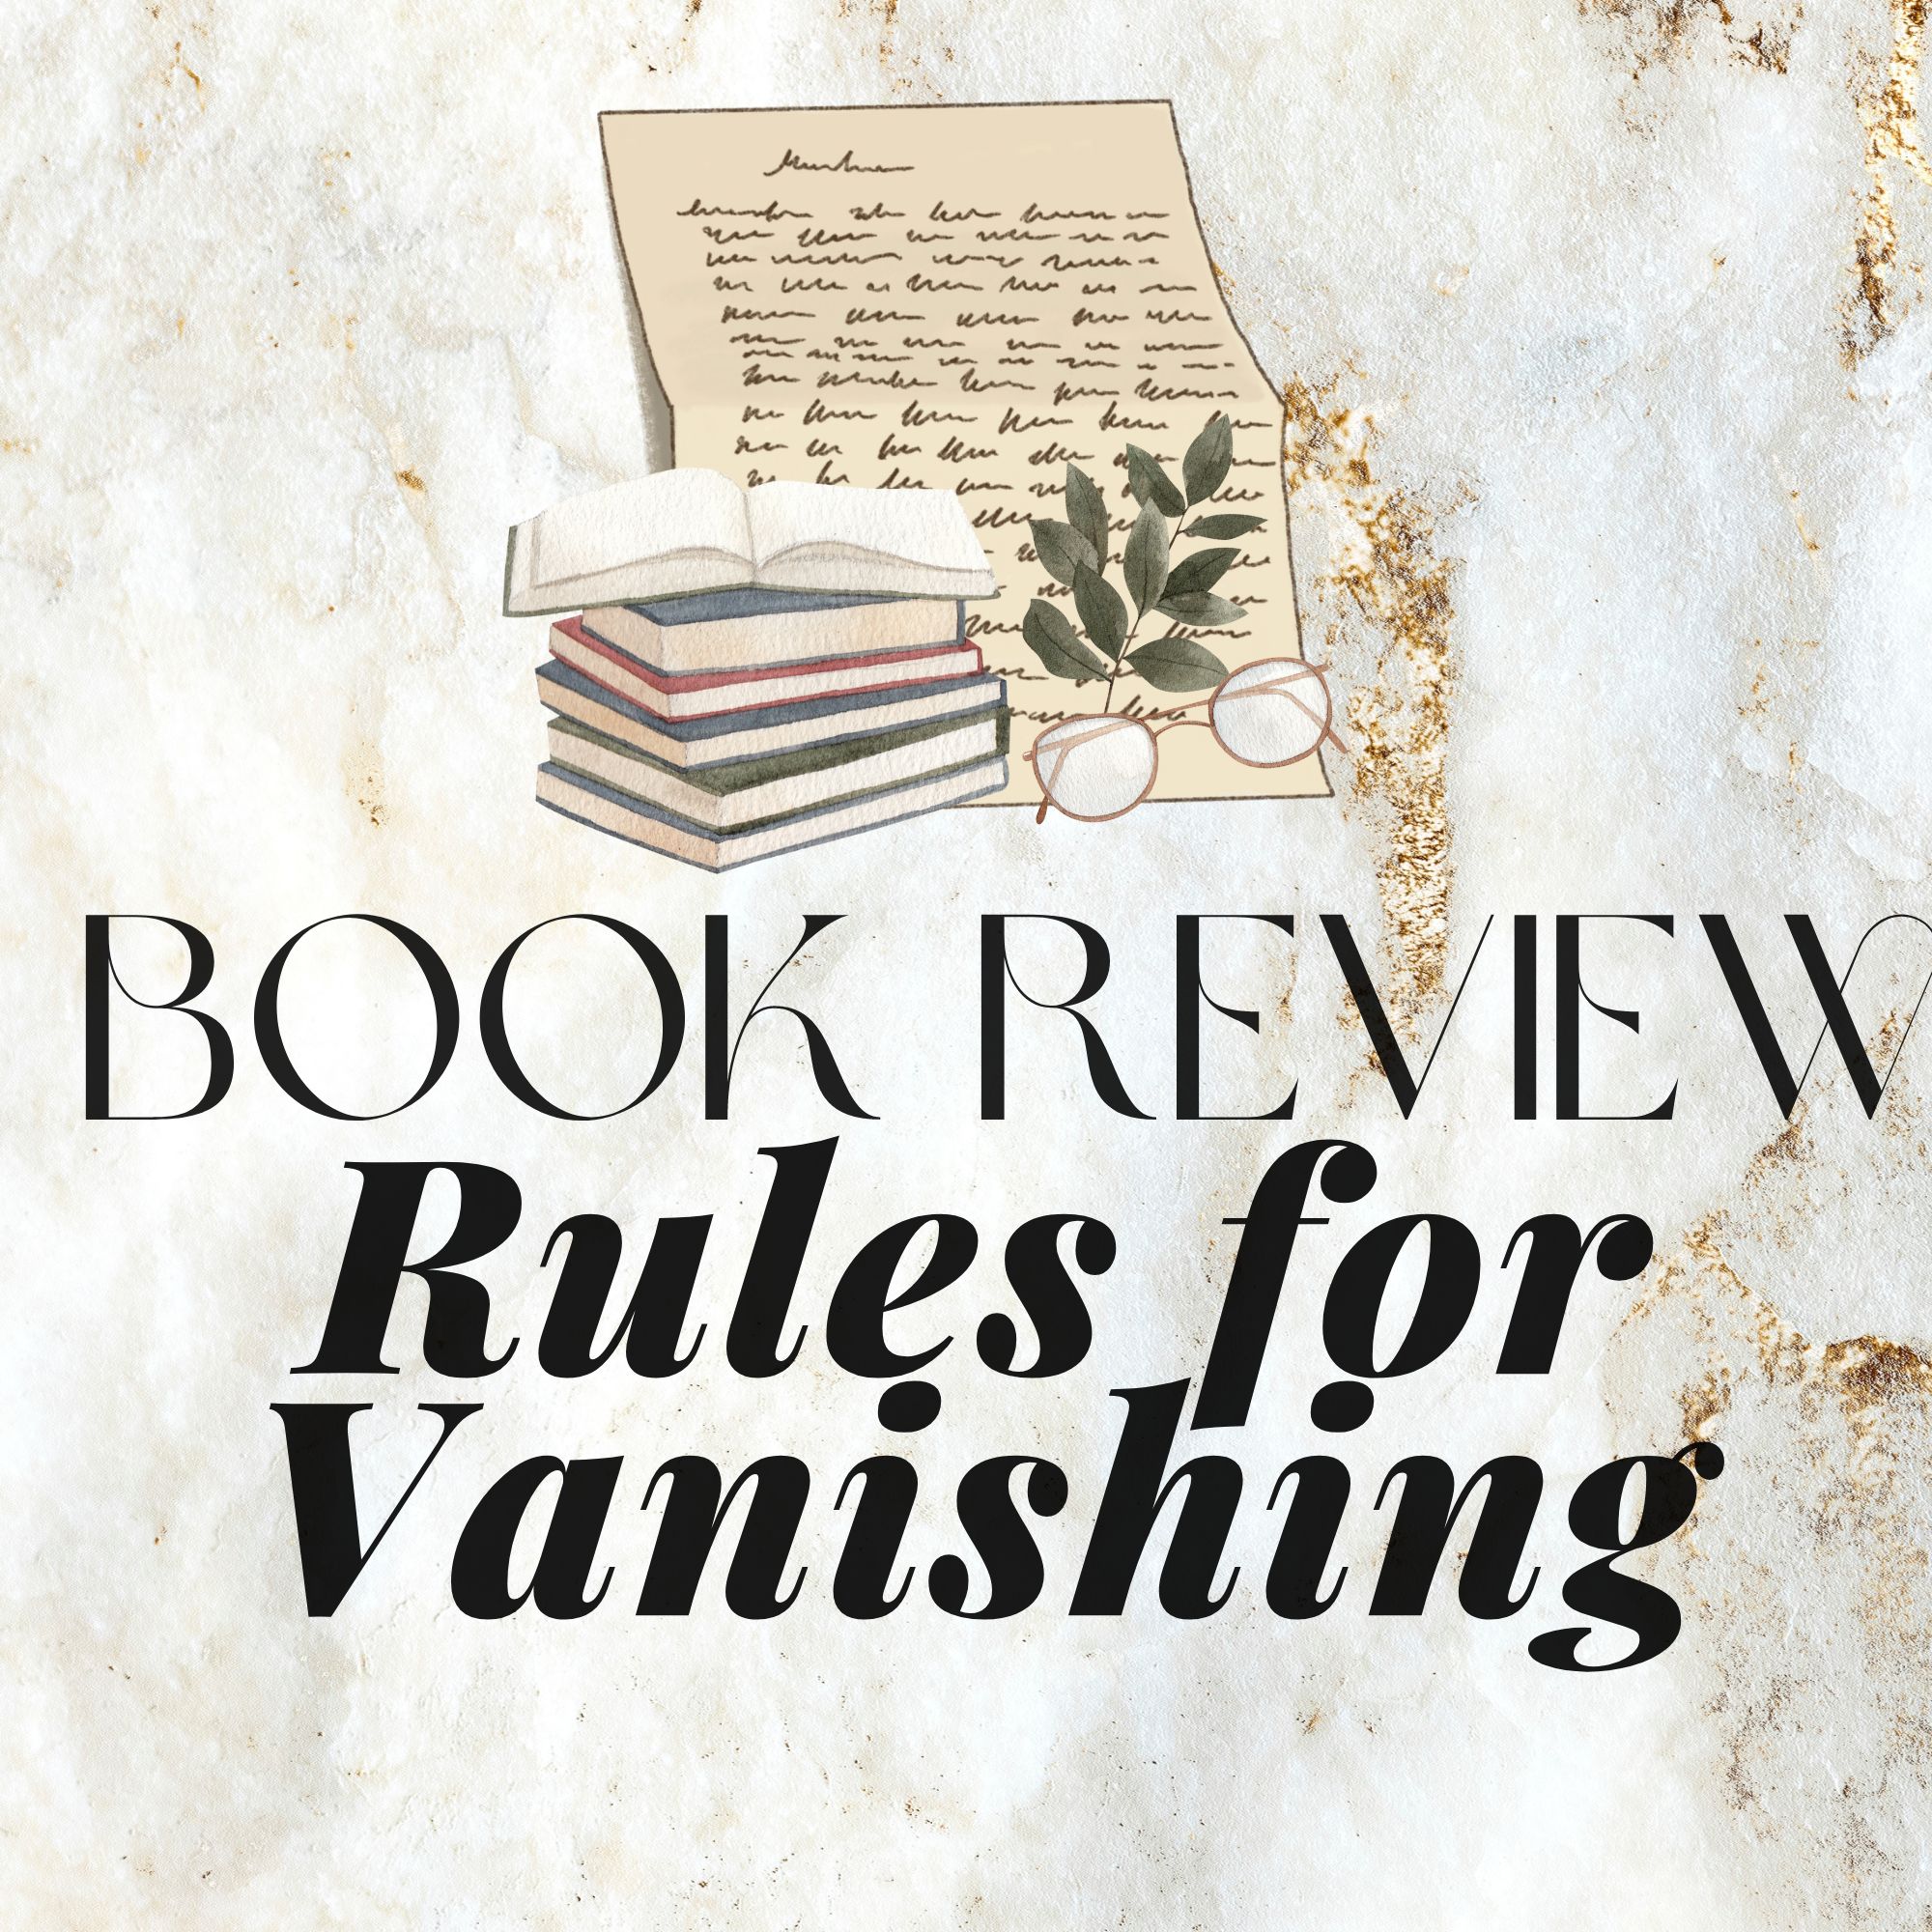 Good Reads Challenge: (First Review of 2023) Rules for Vanishing